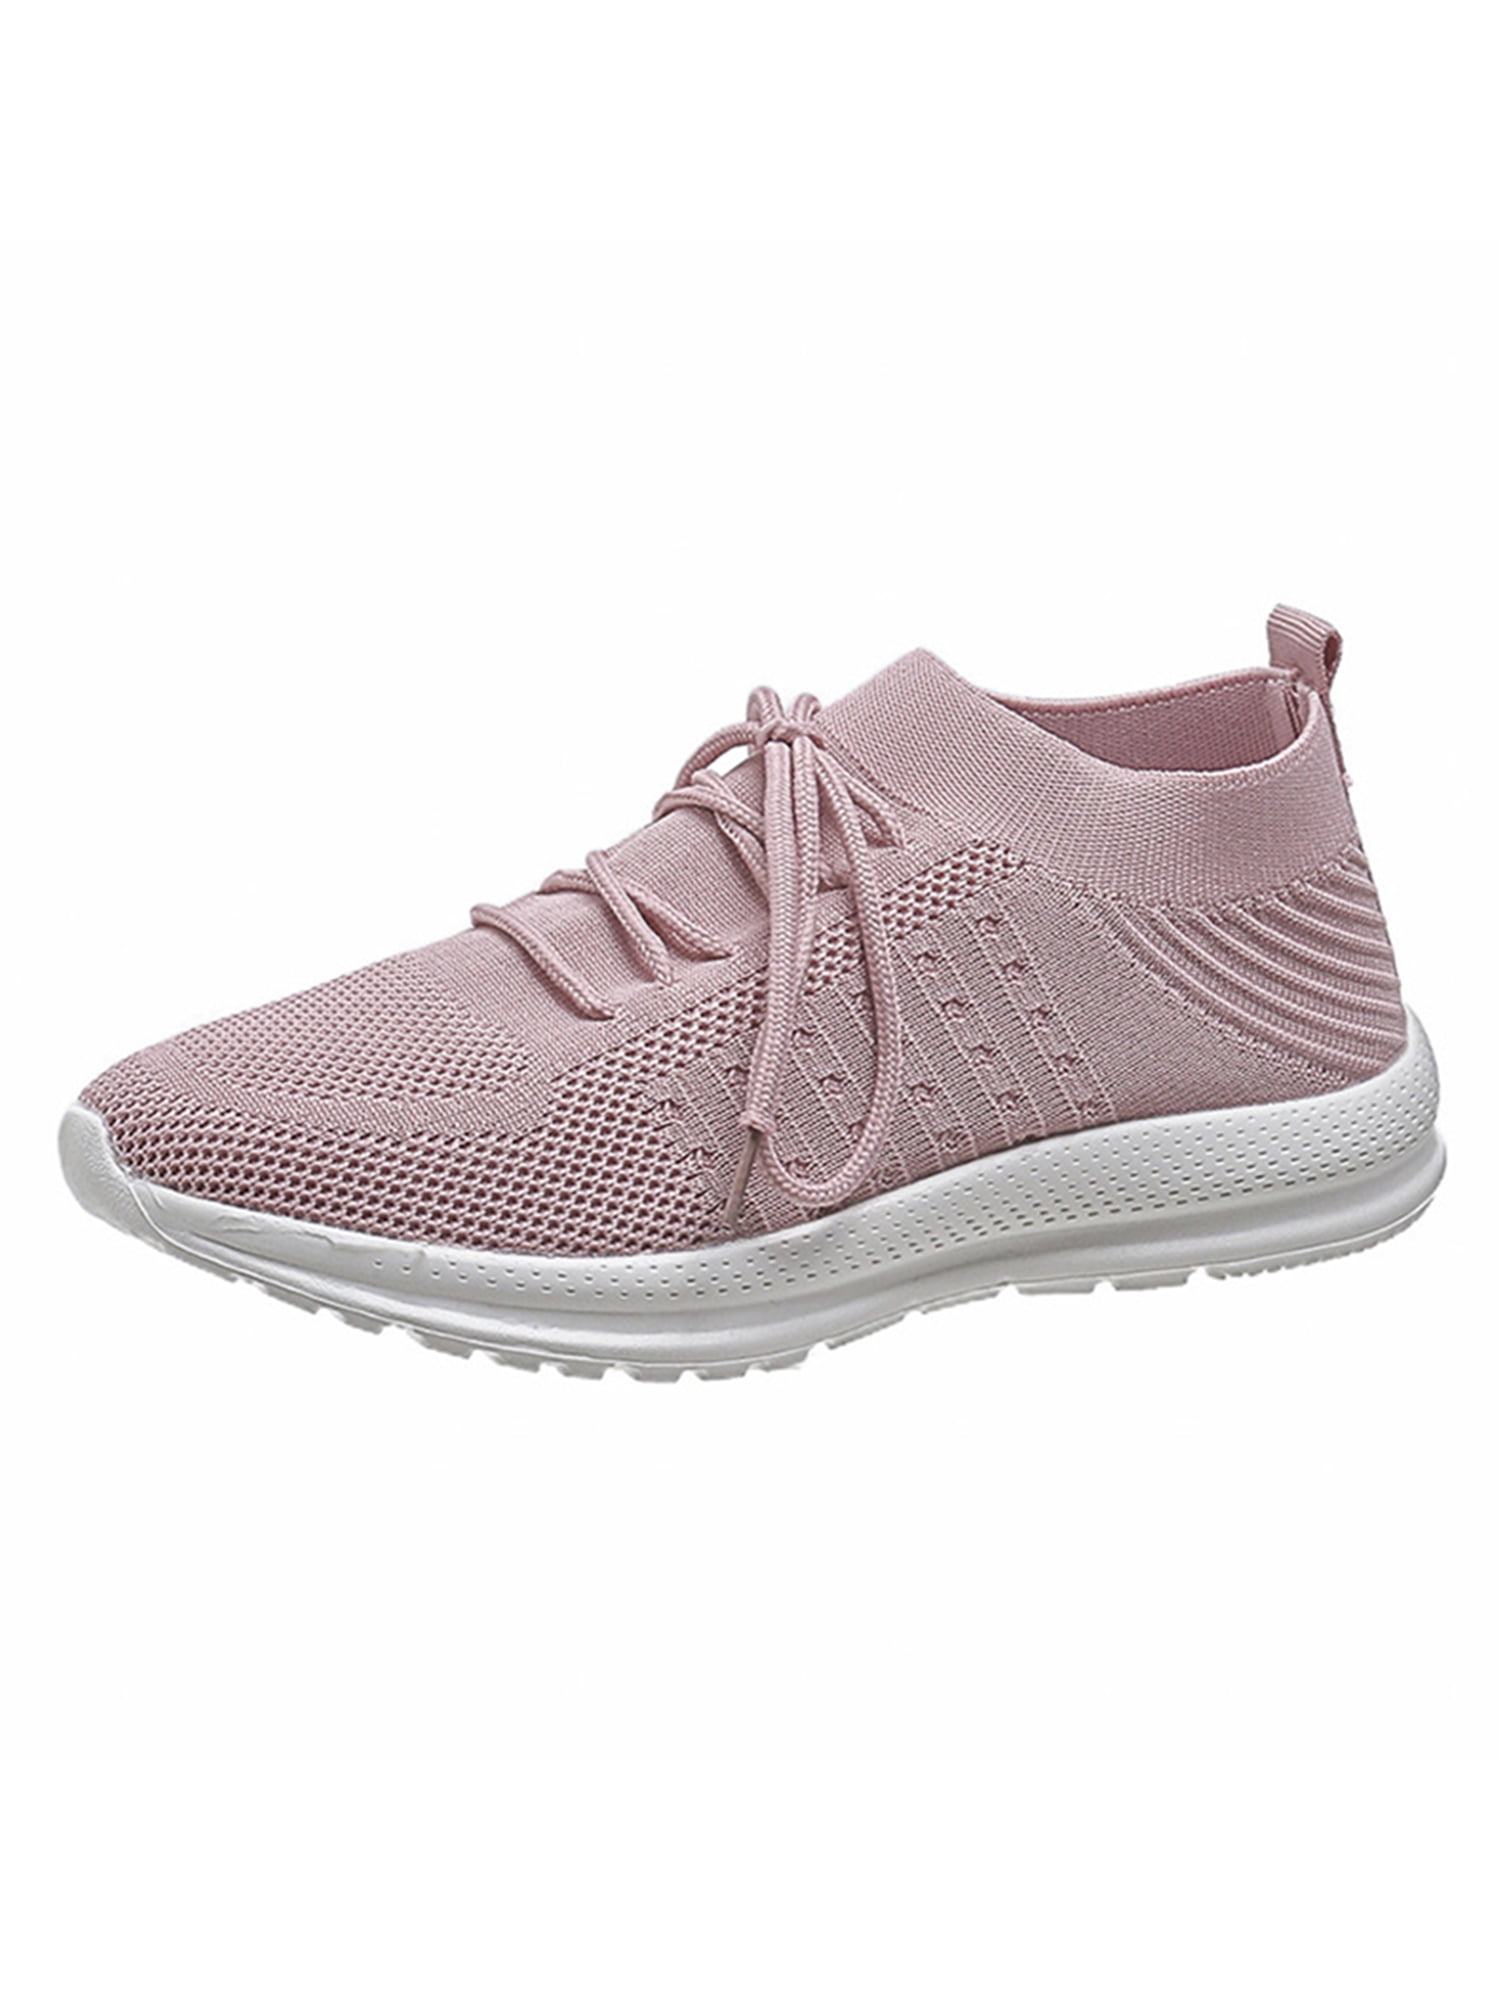 White Sneakers for Women Lace Up Shoes Wide Width Running Athletic ...